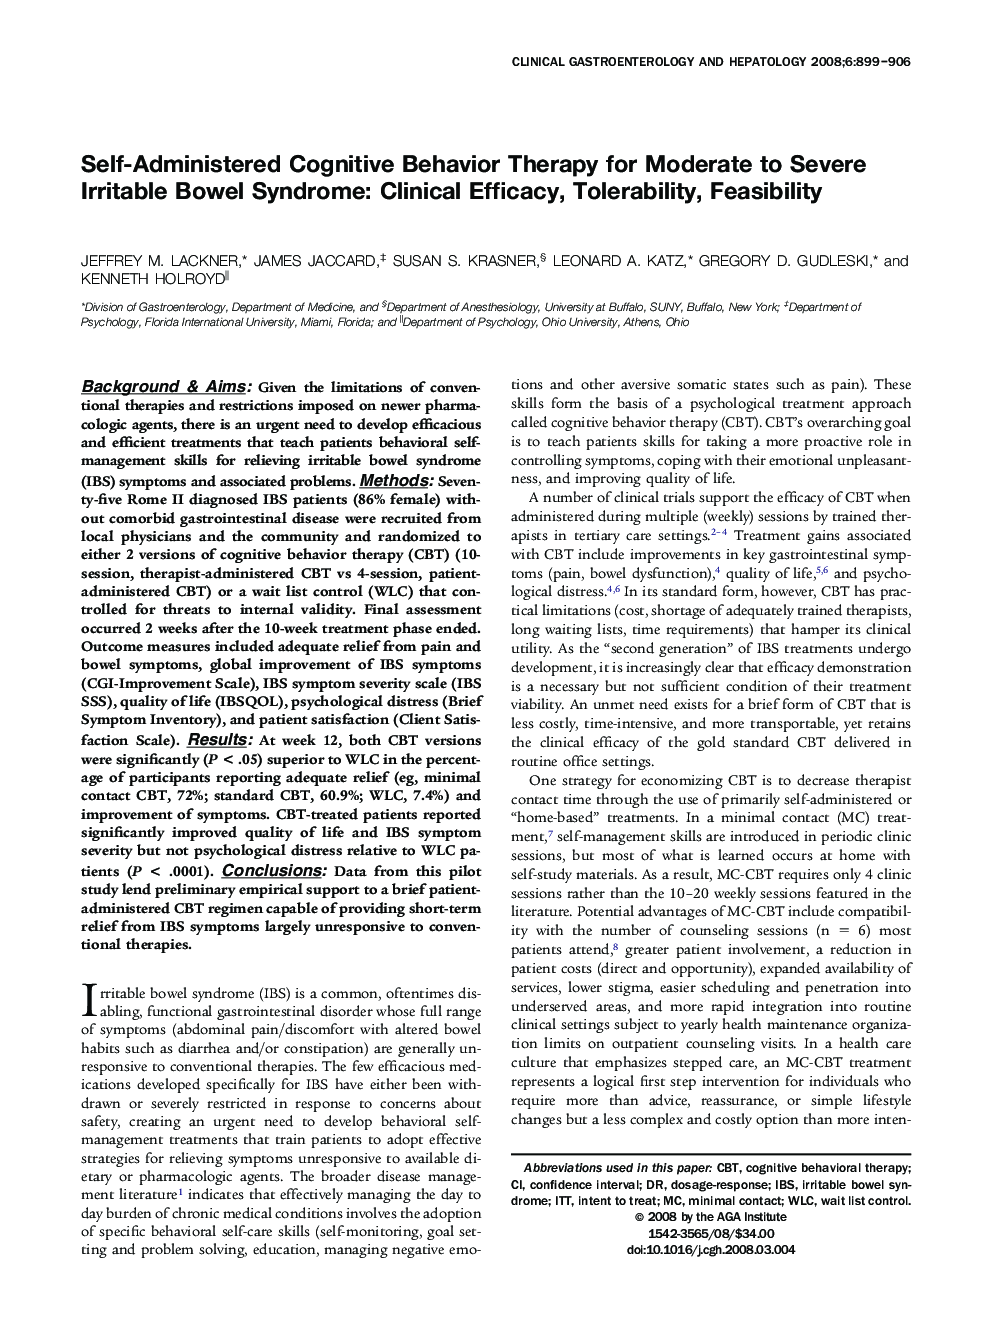 Self-Administered Cognitive Behavior Therapy for Moderate to Severe Irritable Bowel Syndrome: Clinical Efficacy, Tolerability, Feasibility